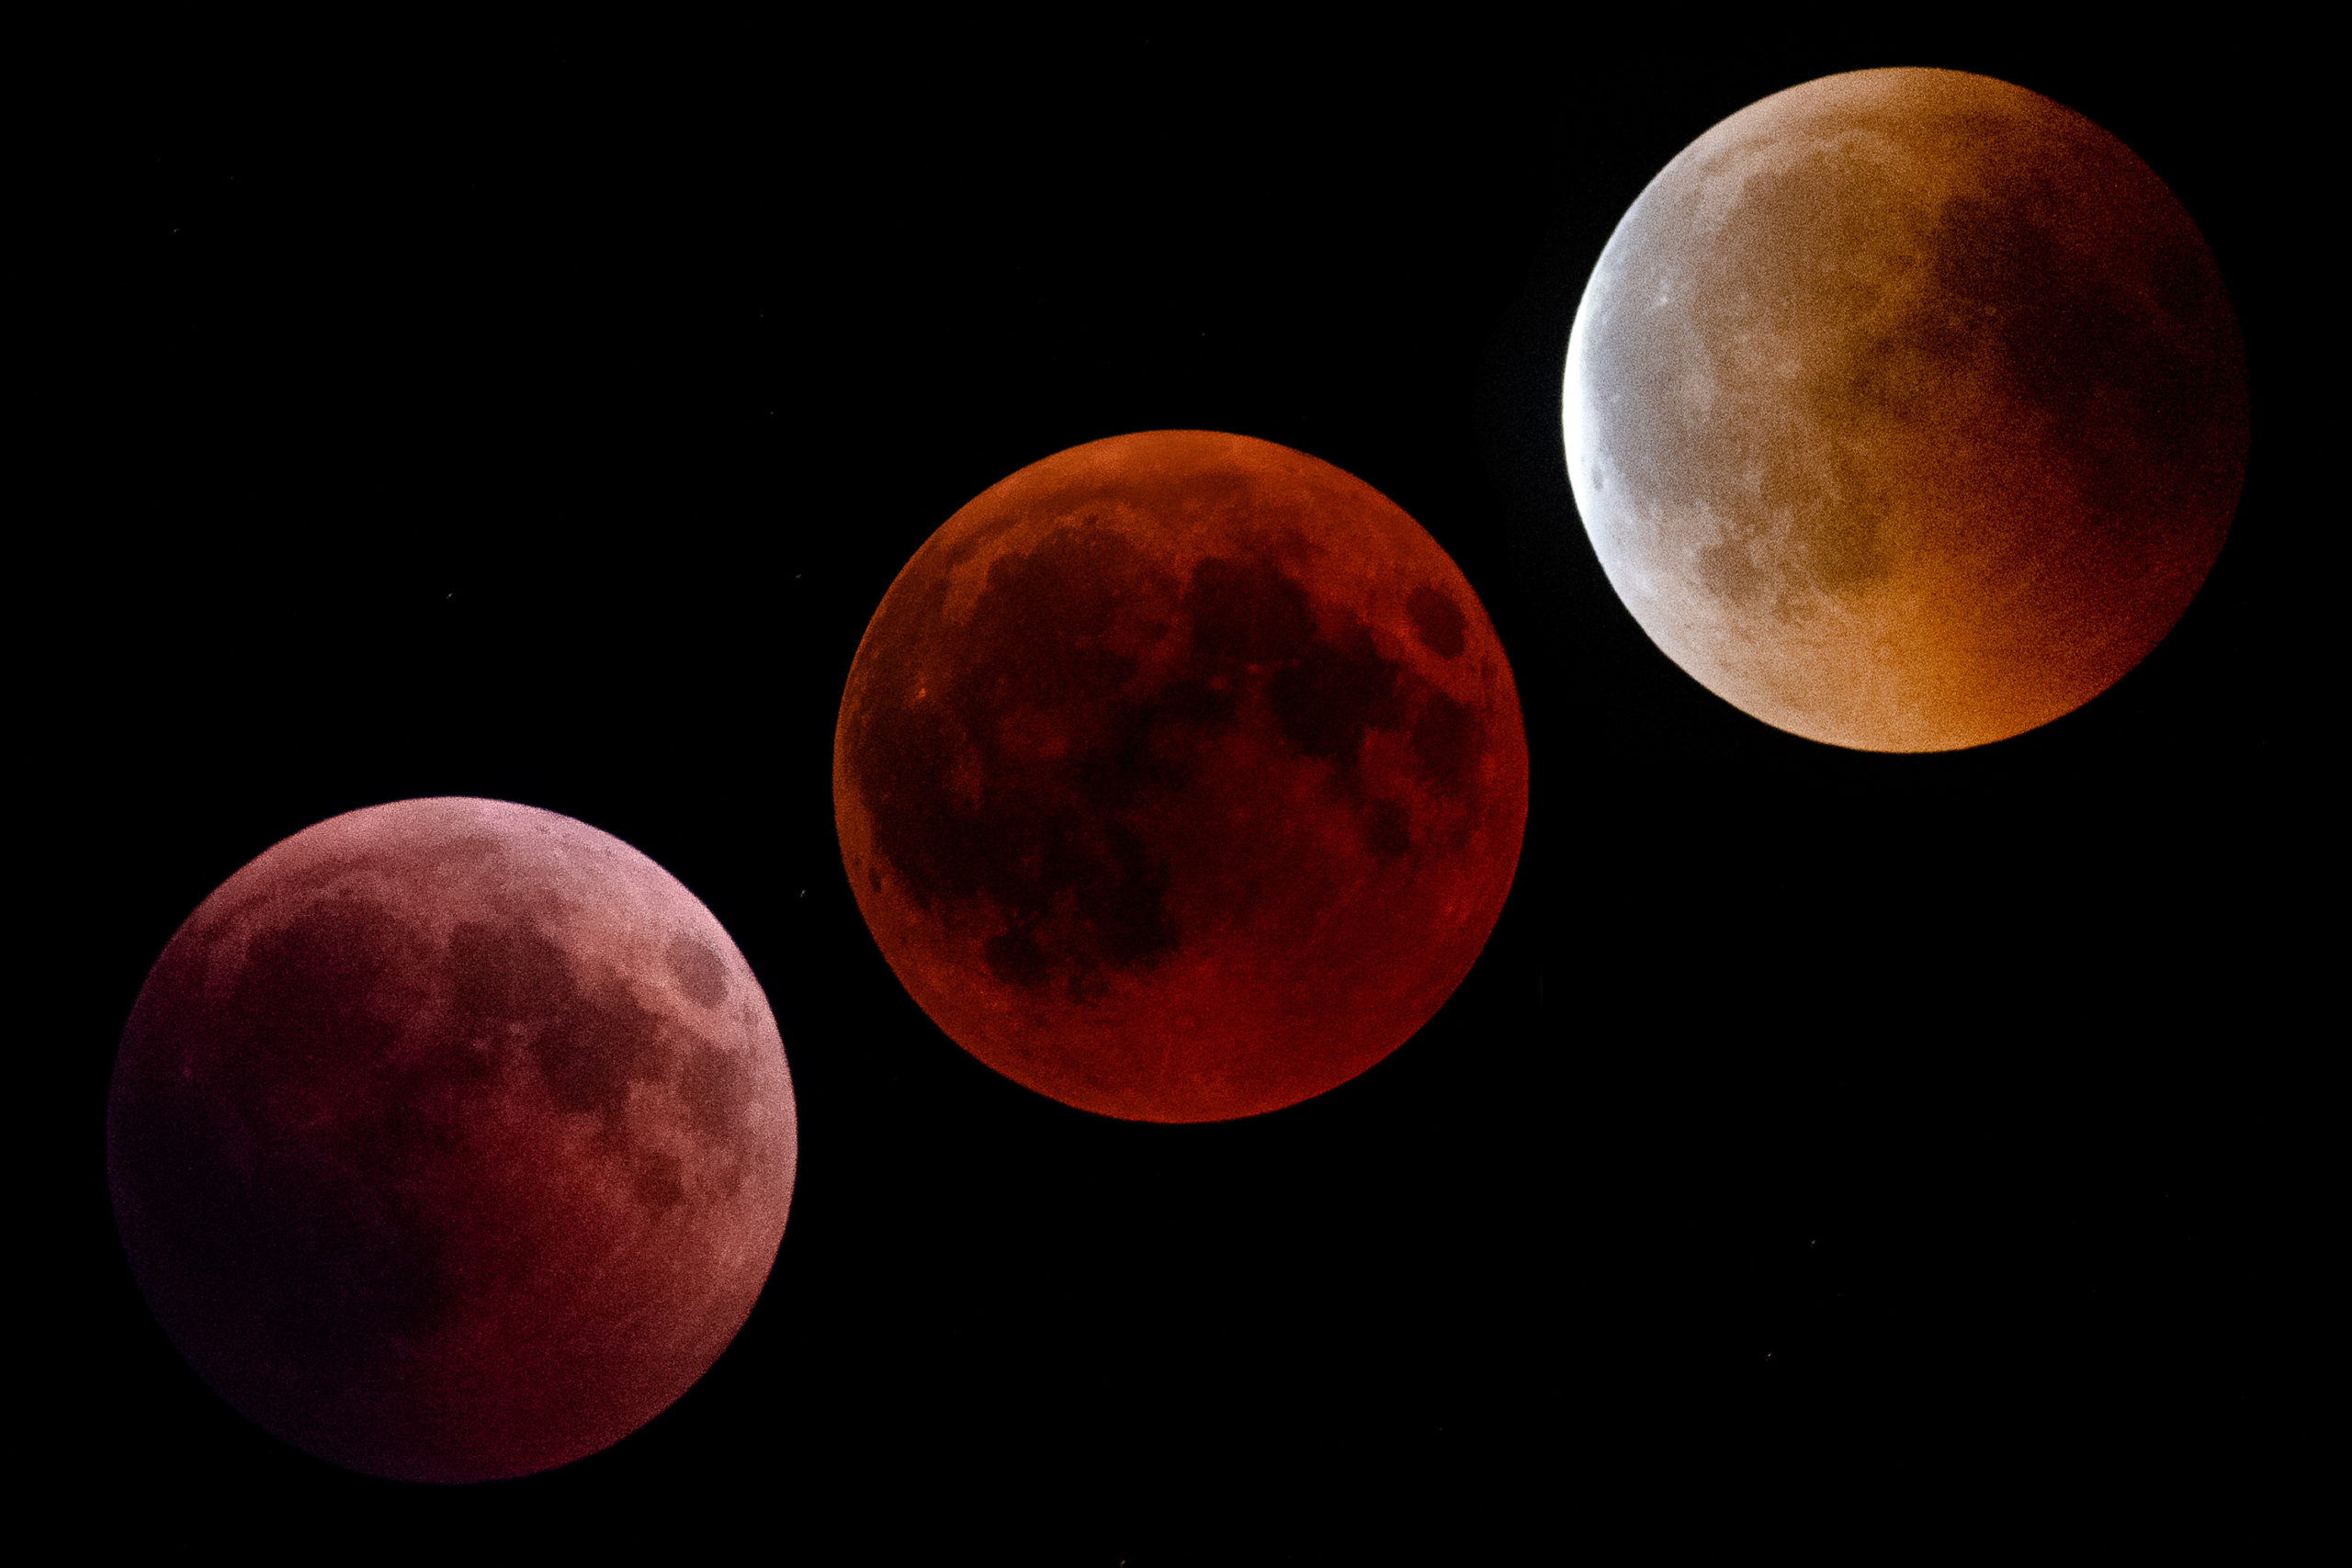 Stargazers Head Out To Catch A Glimpse Of The Blood Moon Lunar Eclipse On Tuesday